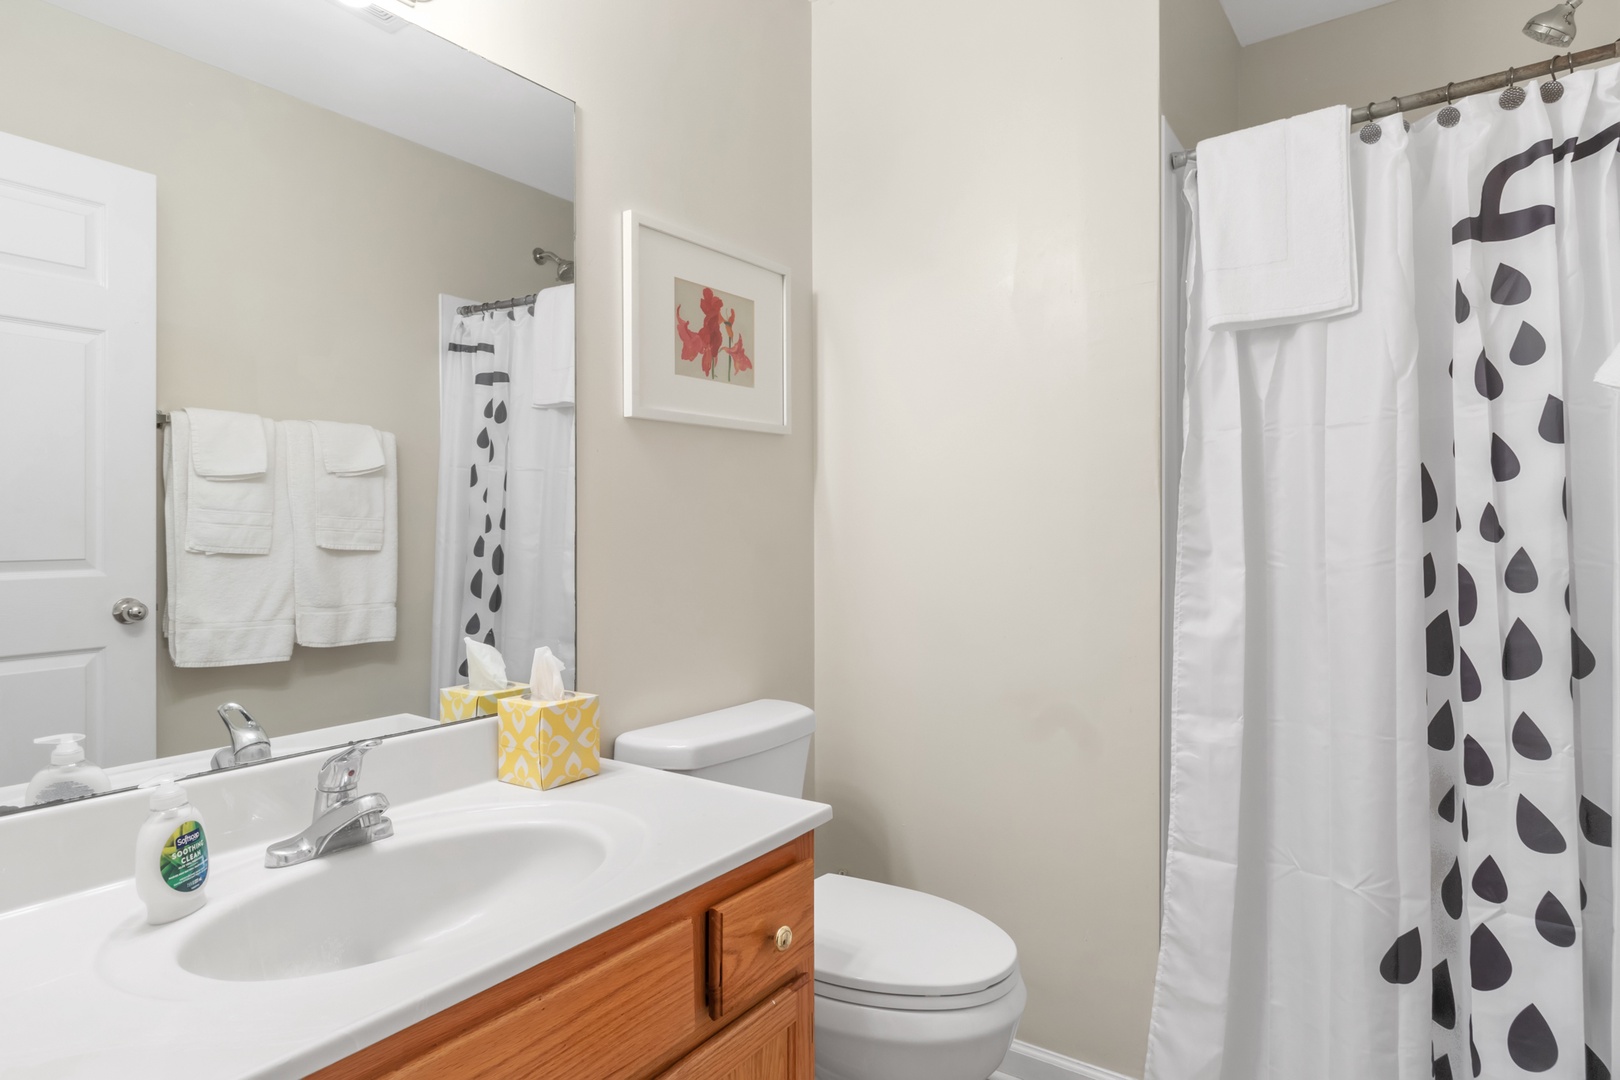 The king ensuite offers a single vanity & walk-in shower